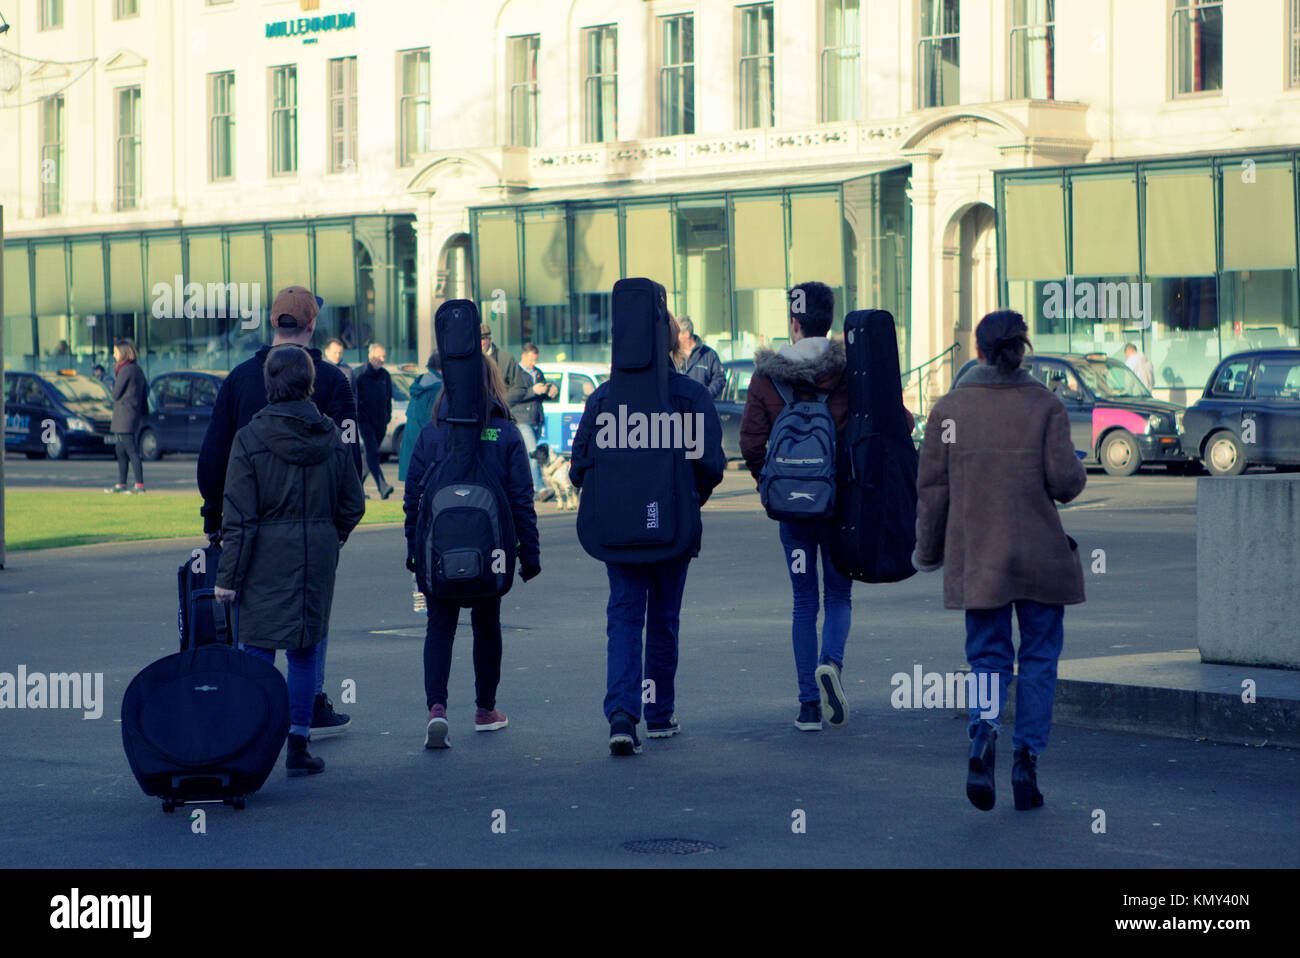 group band crowd of young people walking on the street boys and girls viewed from behind with guitar cases George Square, Glasgow, United Kingdom Stock Photo